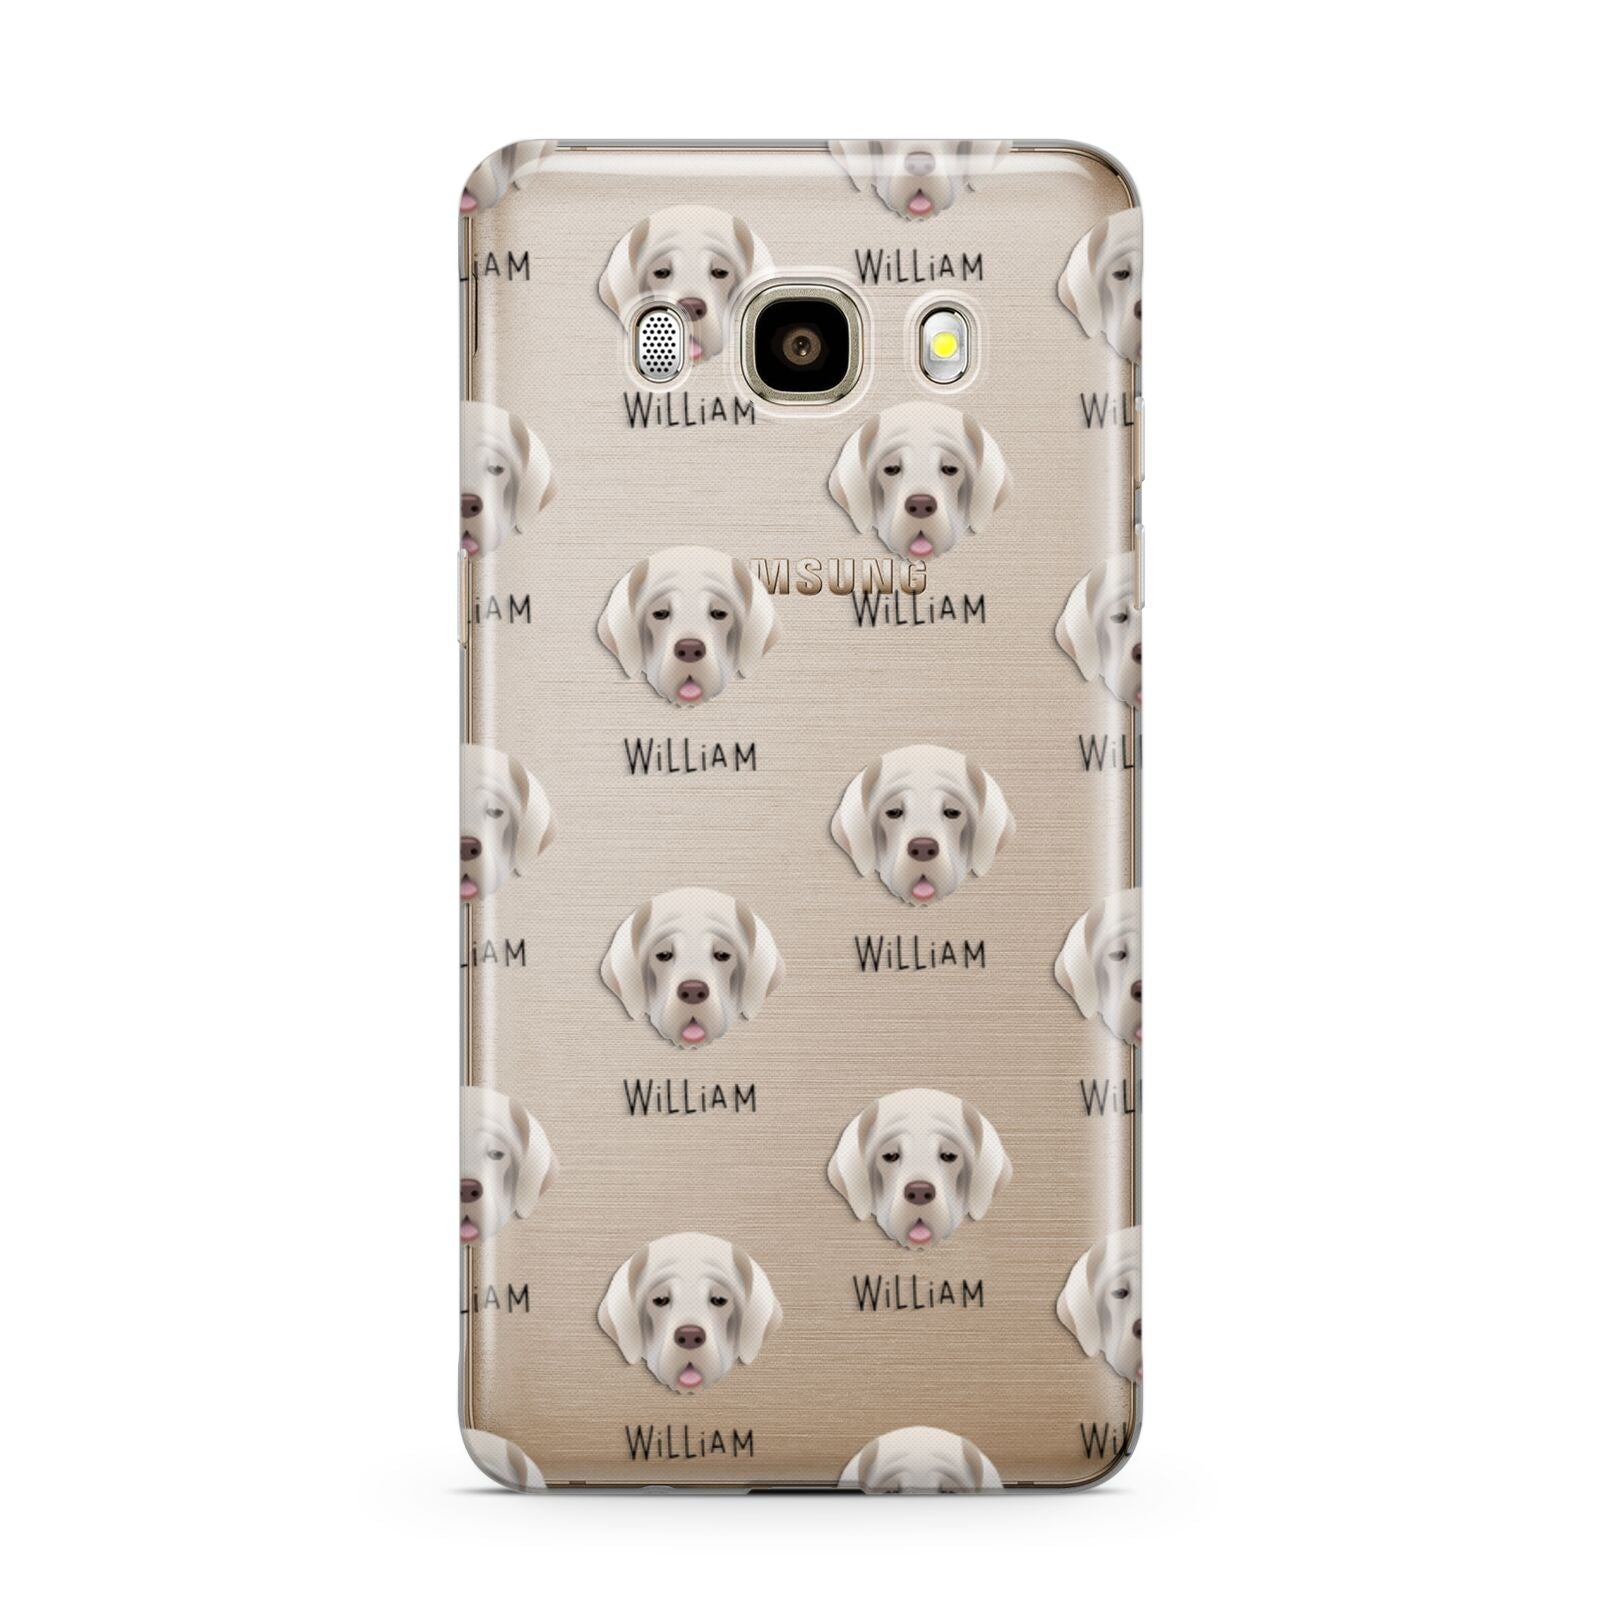 Cirneco Dell Etna Icon with Name Samsung Galaxy J7 2016 Case on gold phone